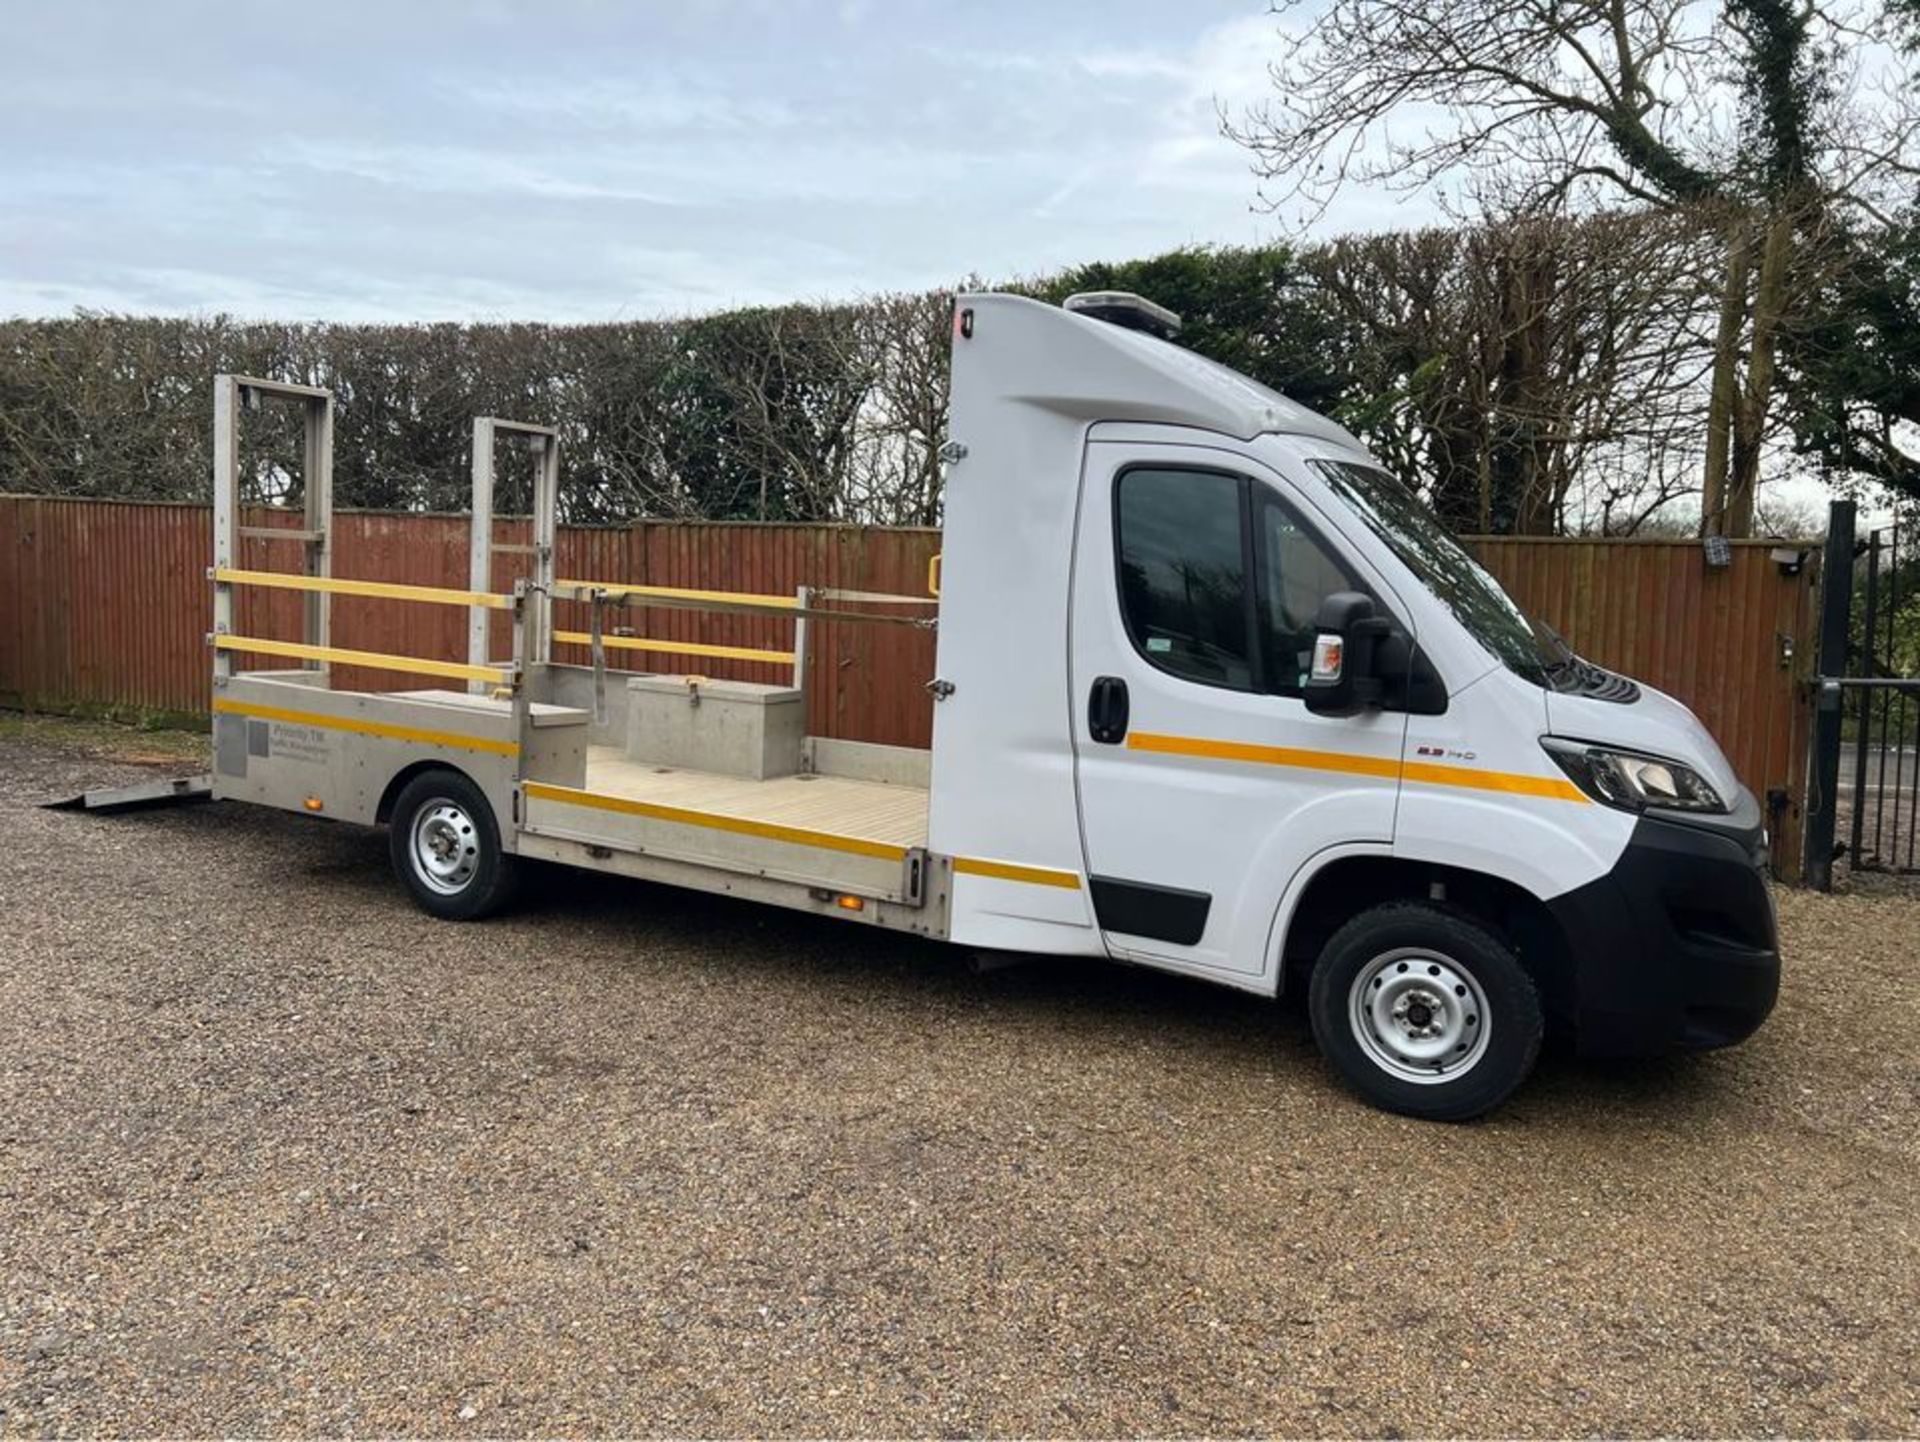 2021, FIAT Ducato 2.3 TD - Low Load Dropside (Traffic Management Truck) - Image 4 of 14